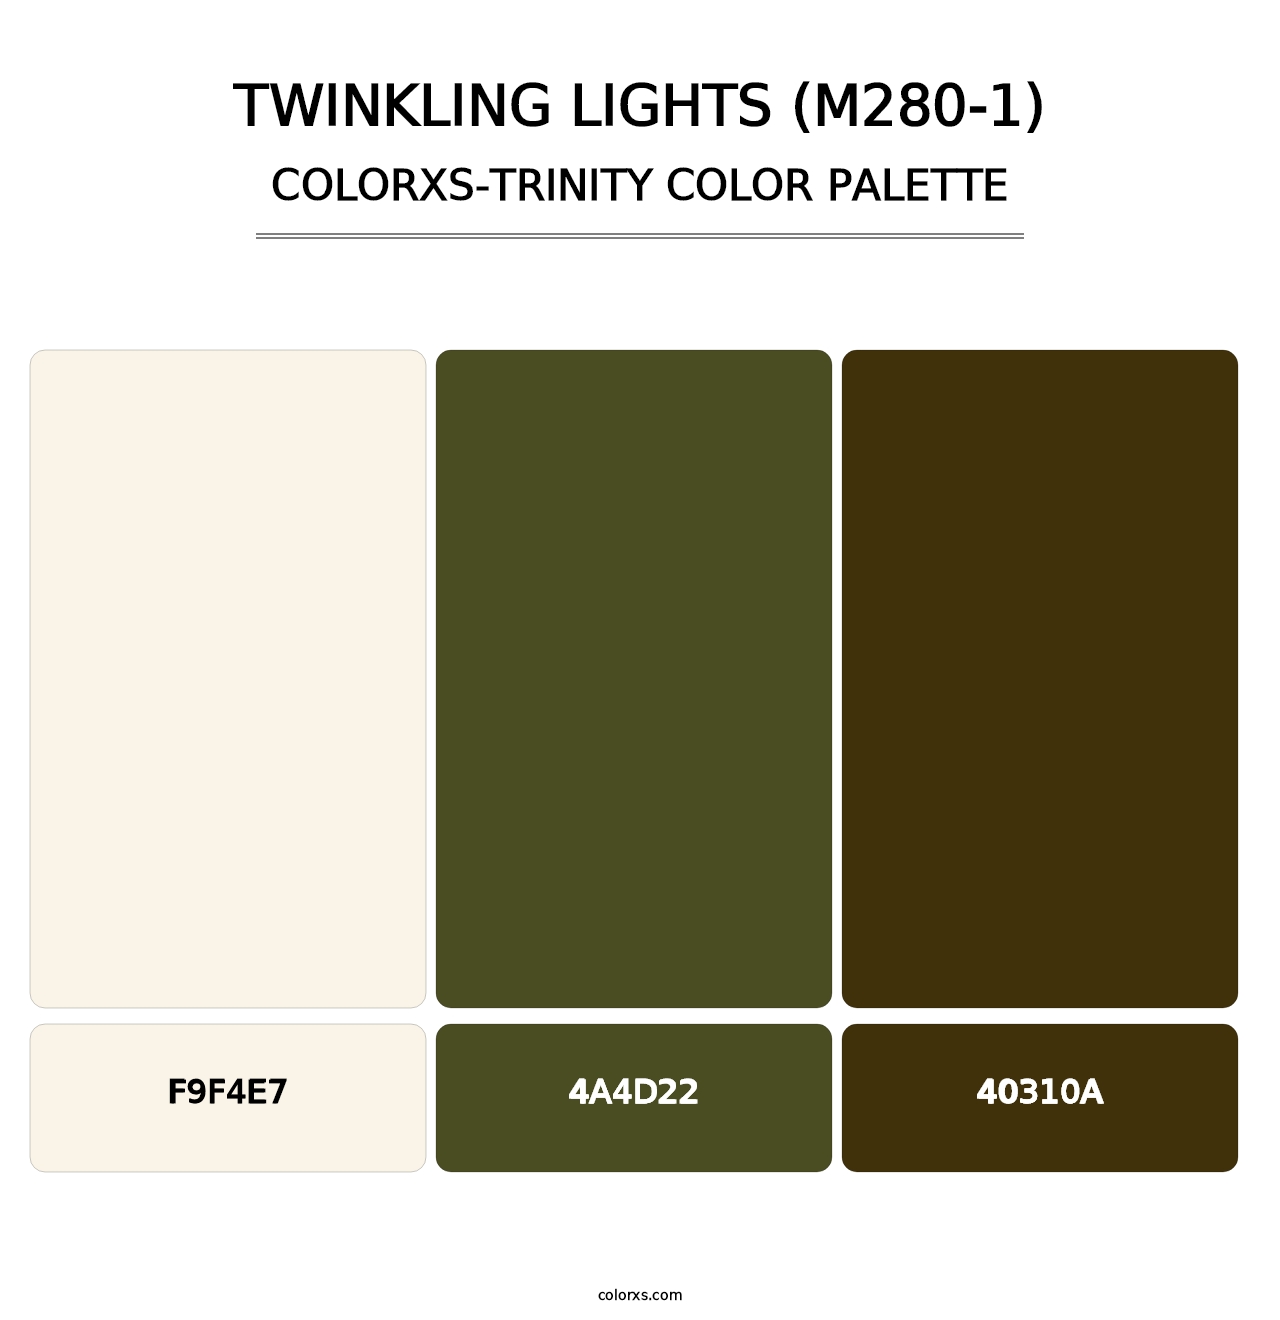 Twinkling Lights (M280-1) - Colorxs Trinity Palette